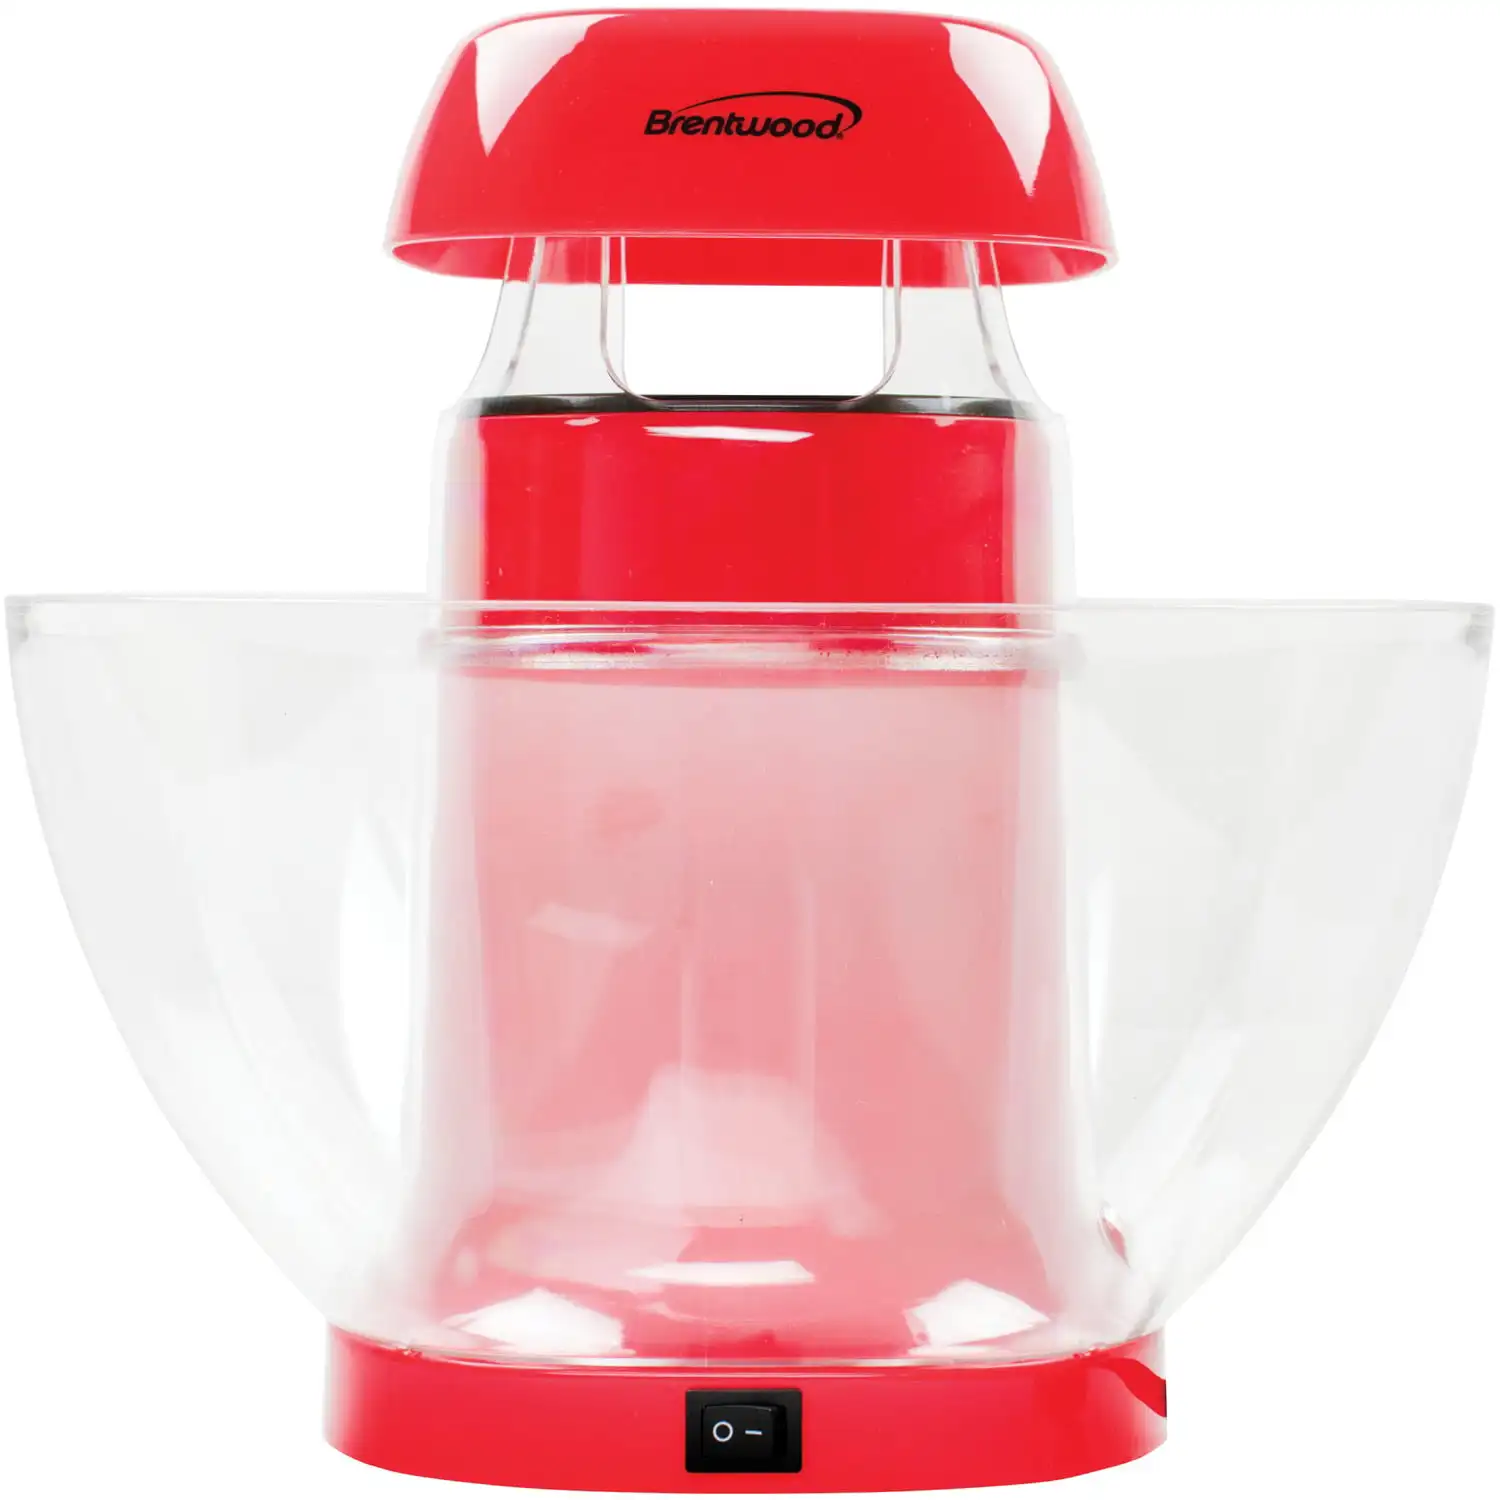 

PC-490R Jumbo 24-cup Hot Air Popcorn Maker Red